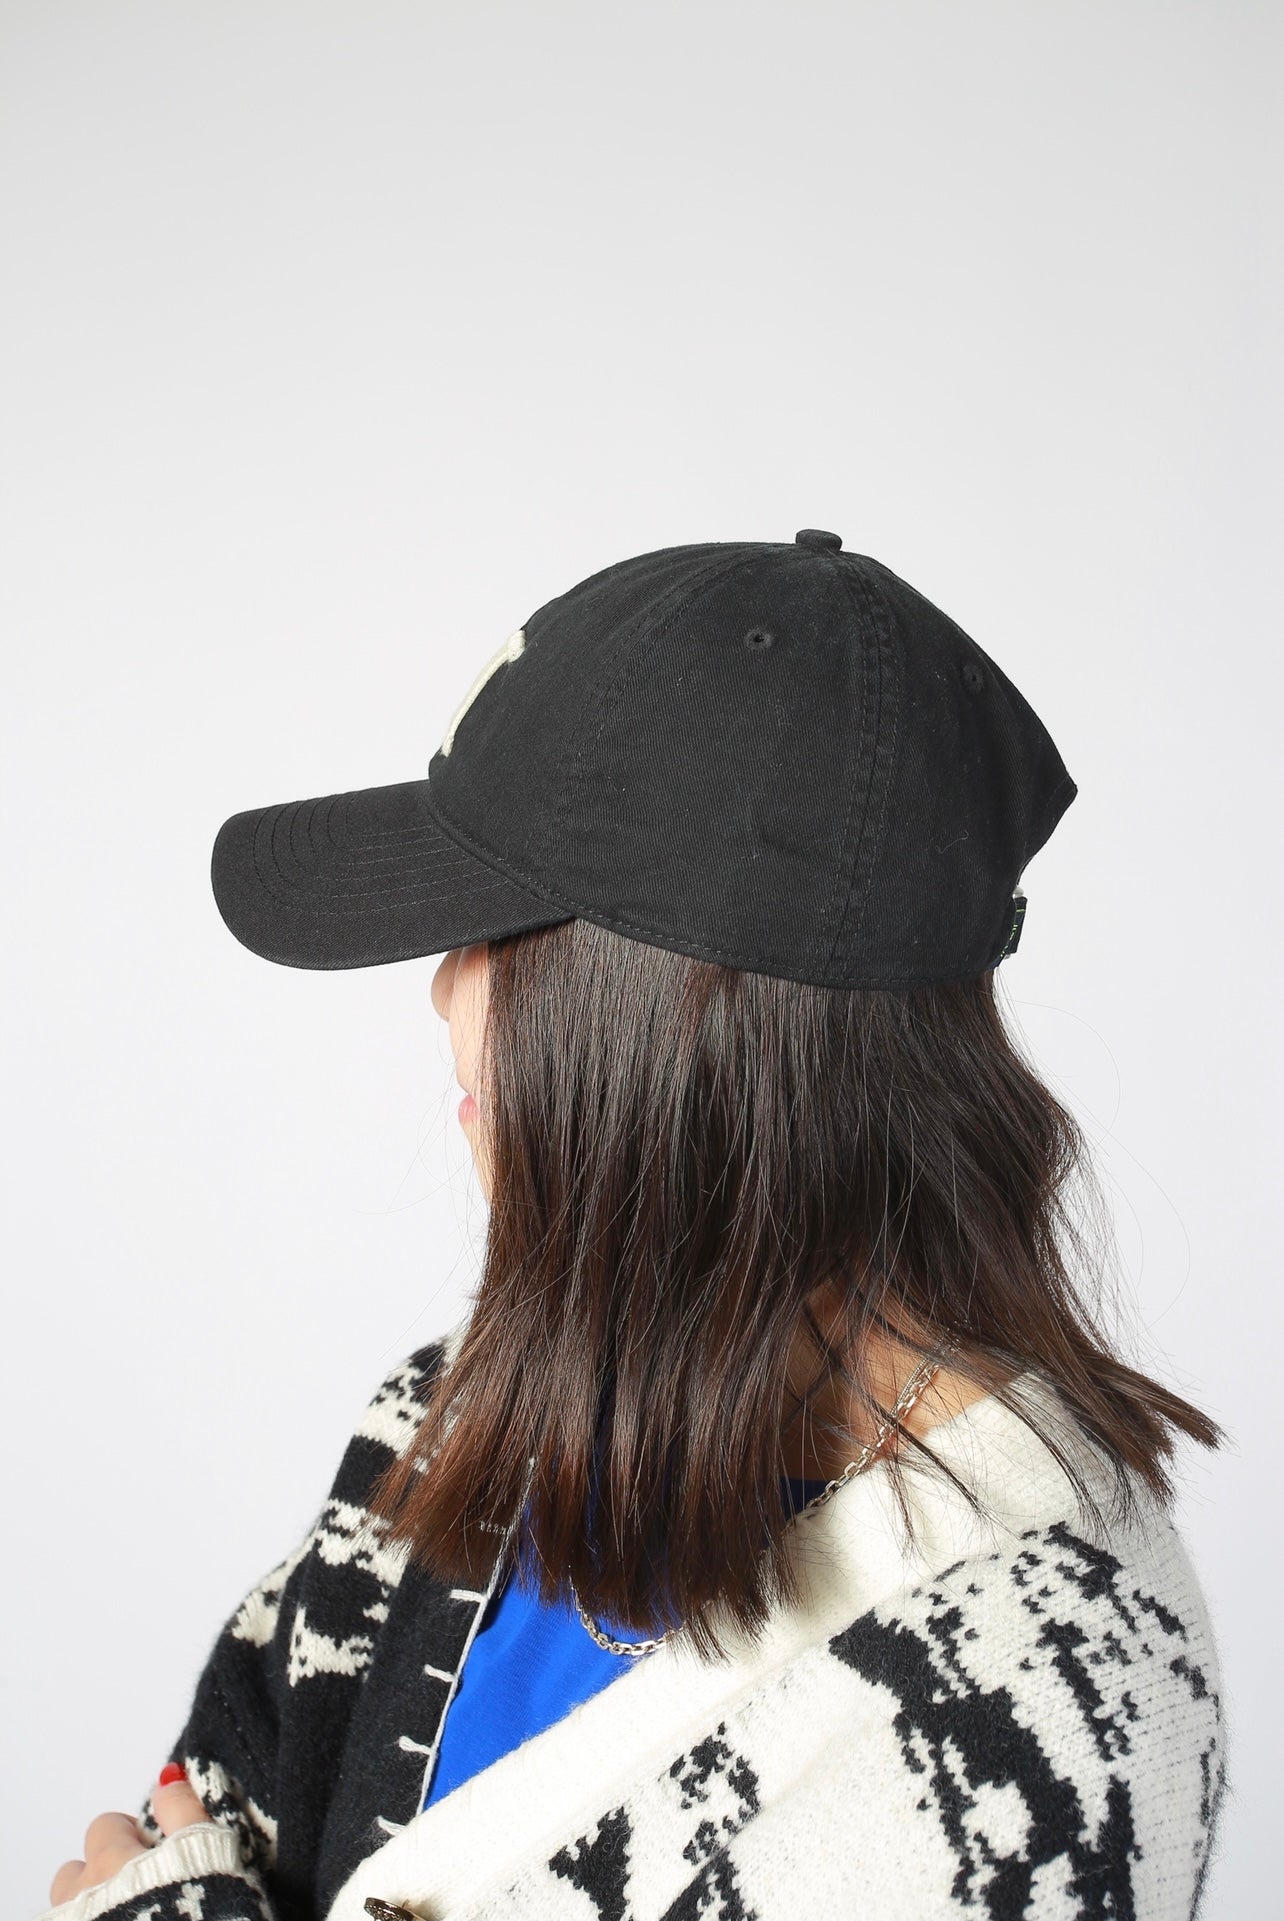 Washed Embroidered H Cap Black